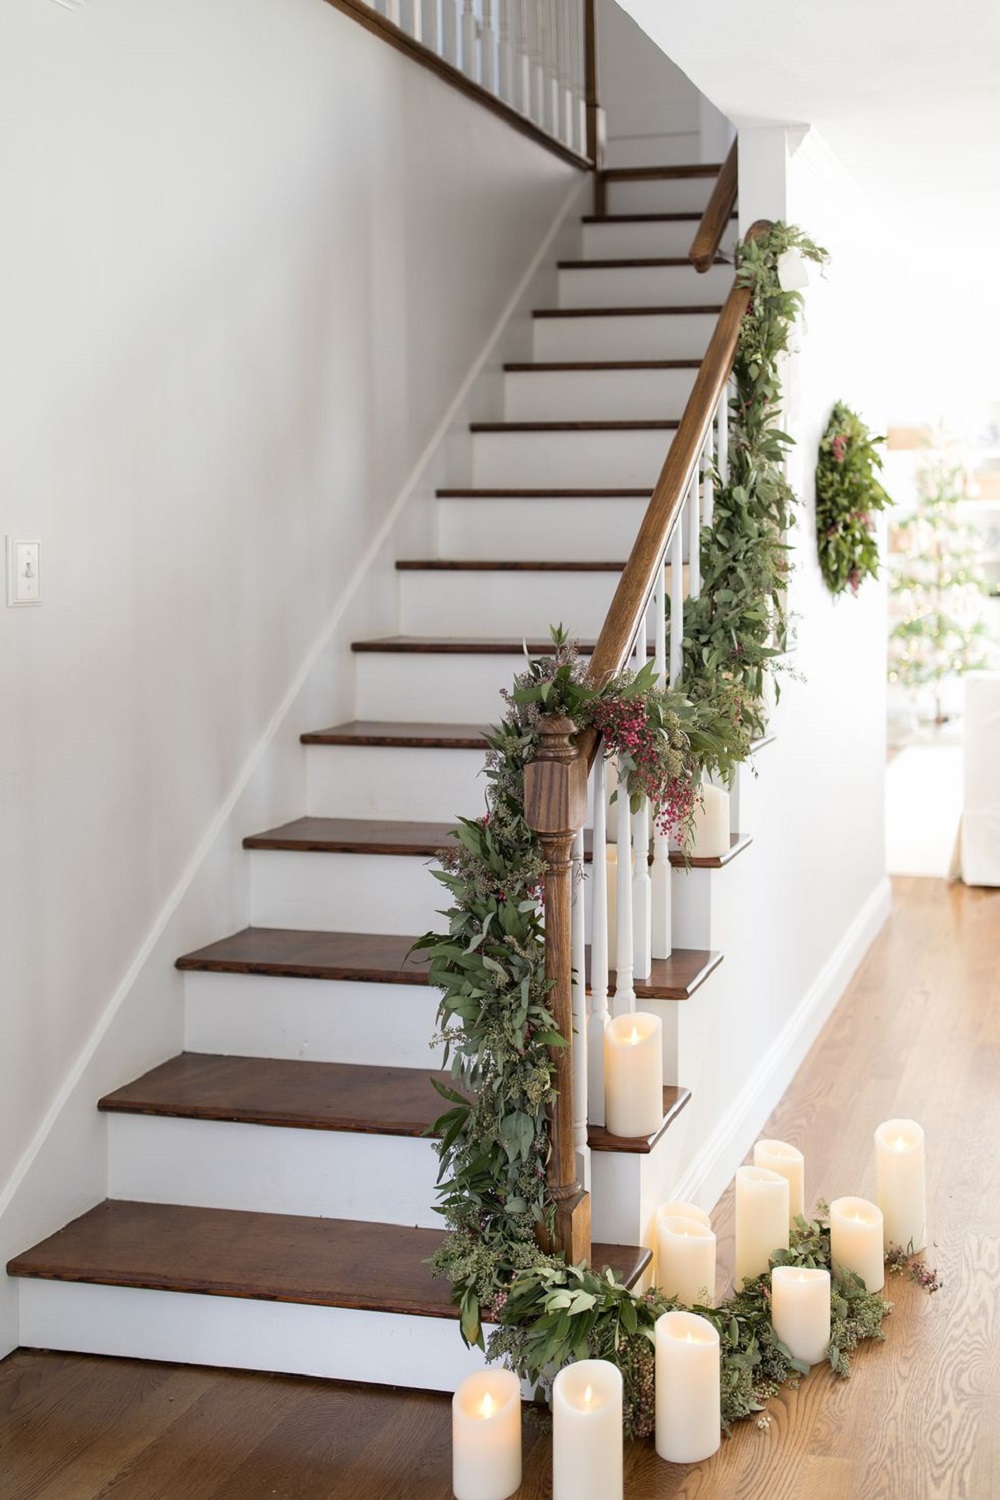 t3-126 Awesome Christmas staircase decorating ideas you should absolutely try